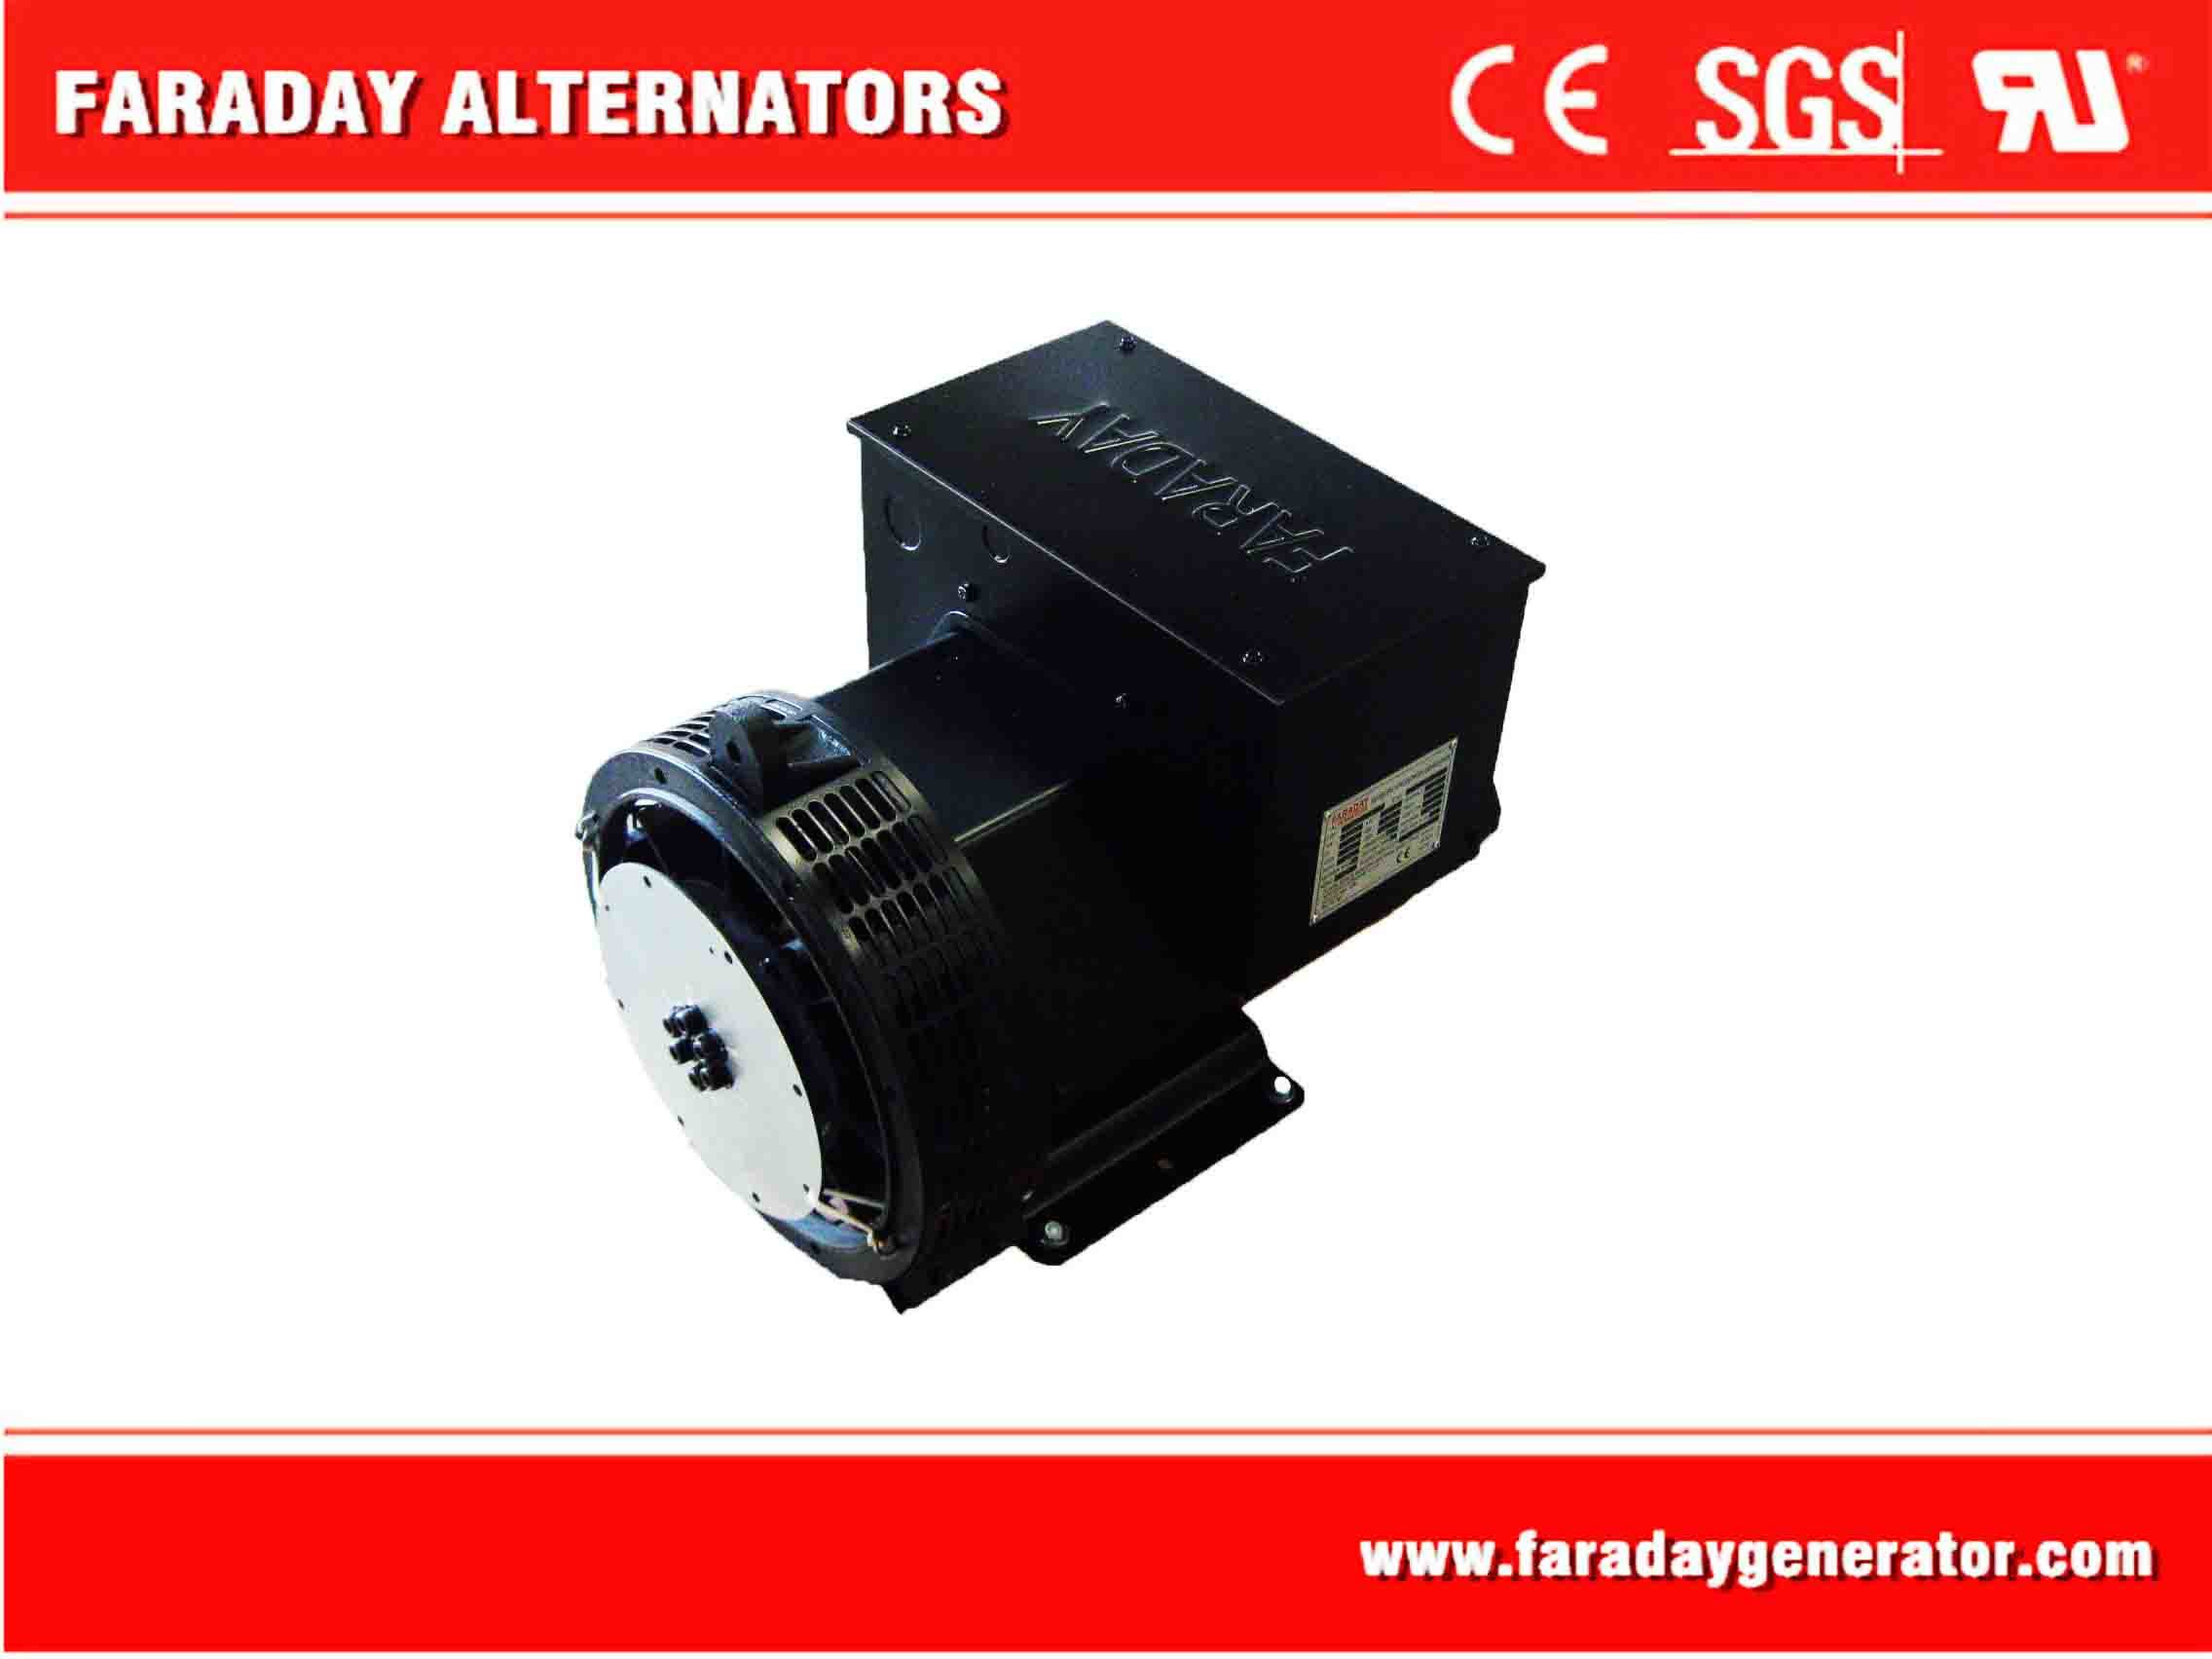 High-Efficiency Synchronous Brushless Alternator Generator with AVR Sx460 (FD1F)